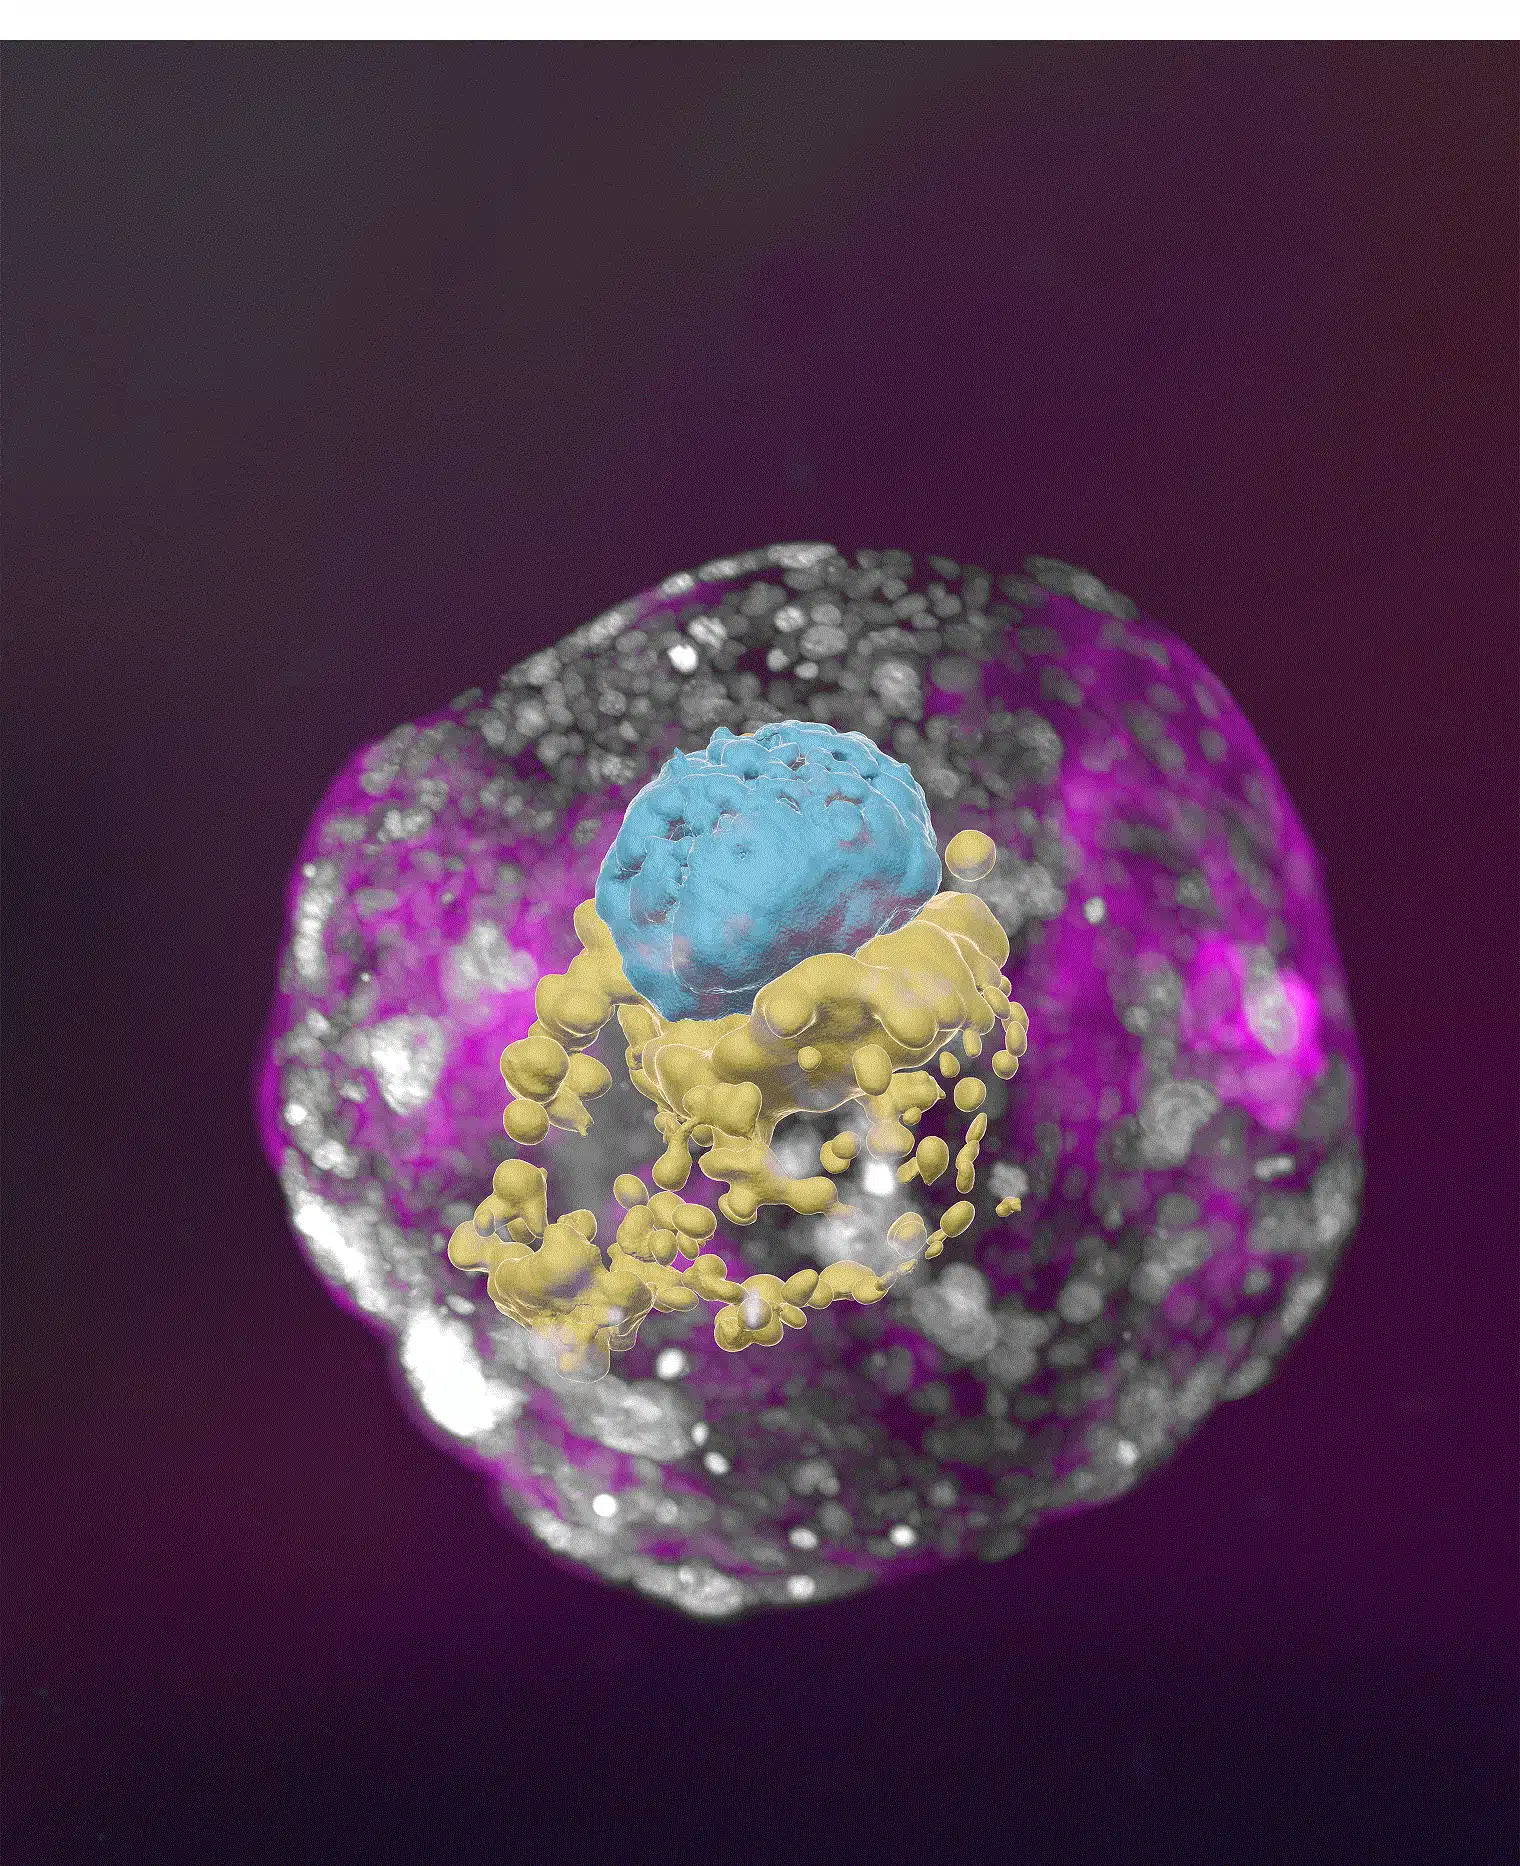 An artificial model of a human embryo at a developmental stage corresponding to day 14 in a real embryo. The model contains all the unique structures characteristic of this stage: the yolk sac (yellow), the part from which the embryo itself will develop with the amniotic sac above it (blue), and the cells that will become the placenta that envelop the entire structure (pink)